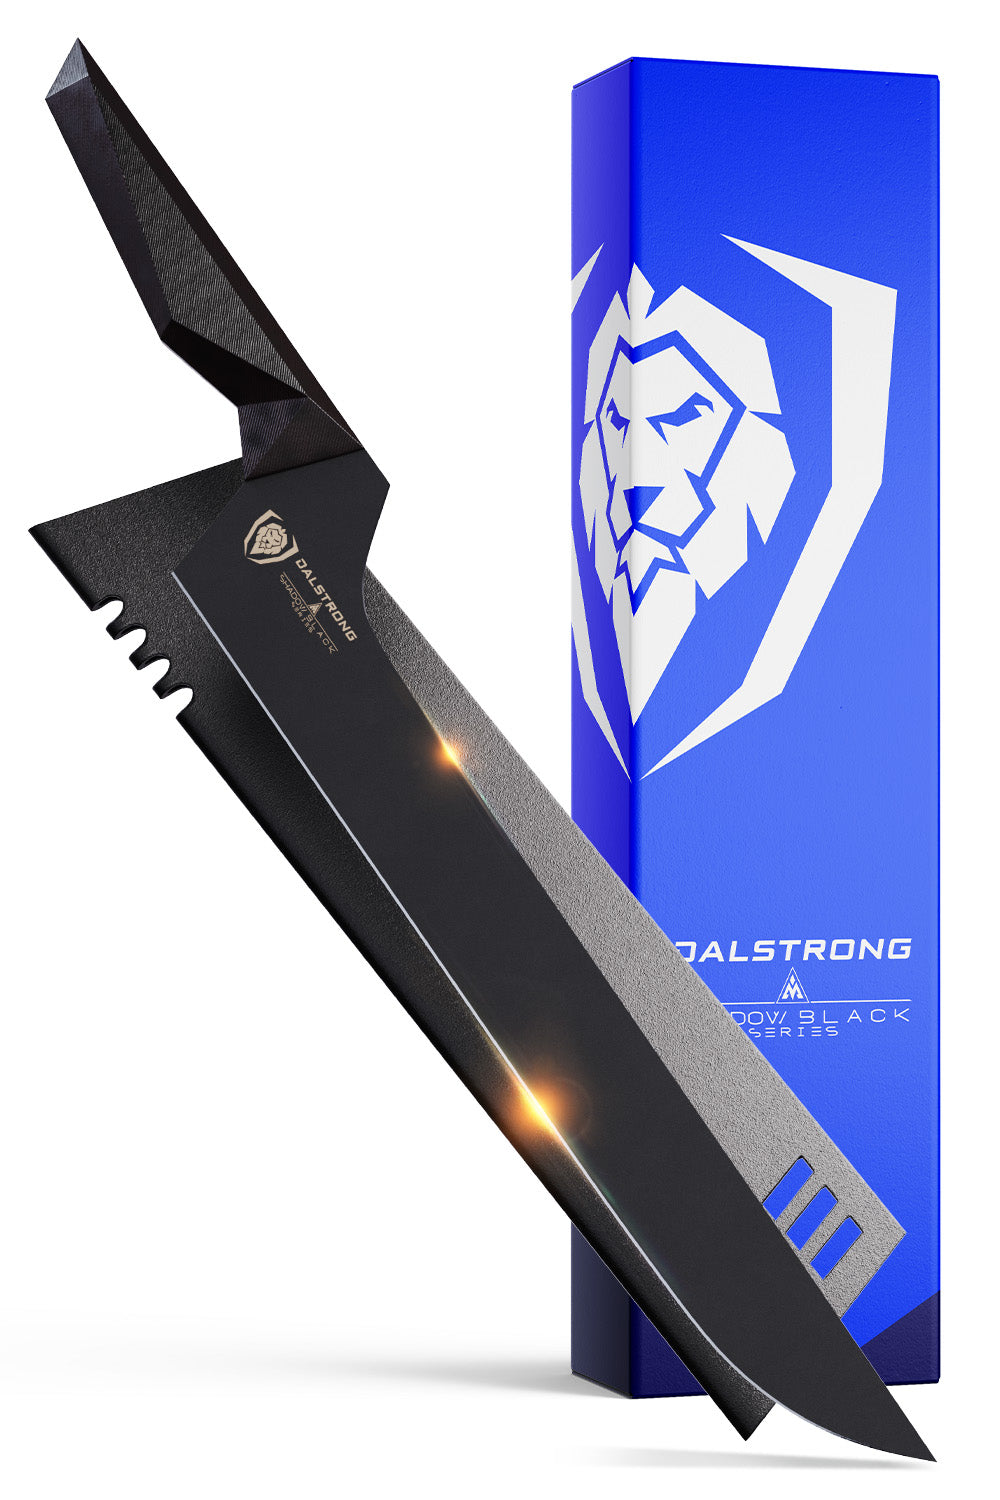 Slicing & Carving Knife 12" | Offset Blade | Shadow Black Series | NSF Certified | Dalstrong ©